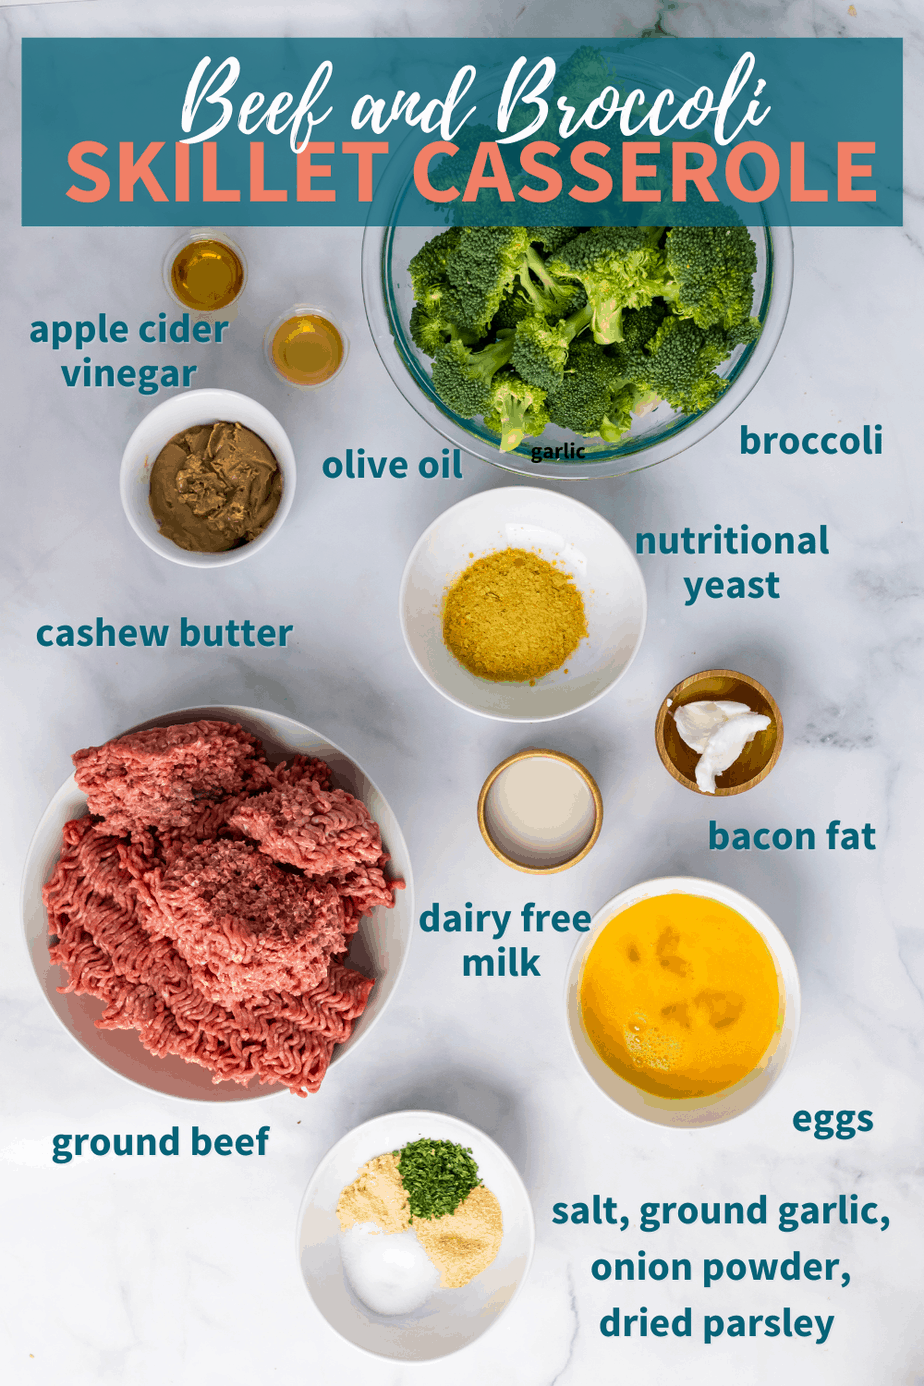 Ingredients for Beef and Broccoli Skillet Casserole laid out on a marble countertop.